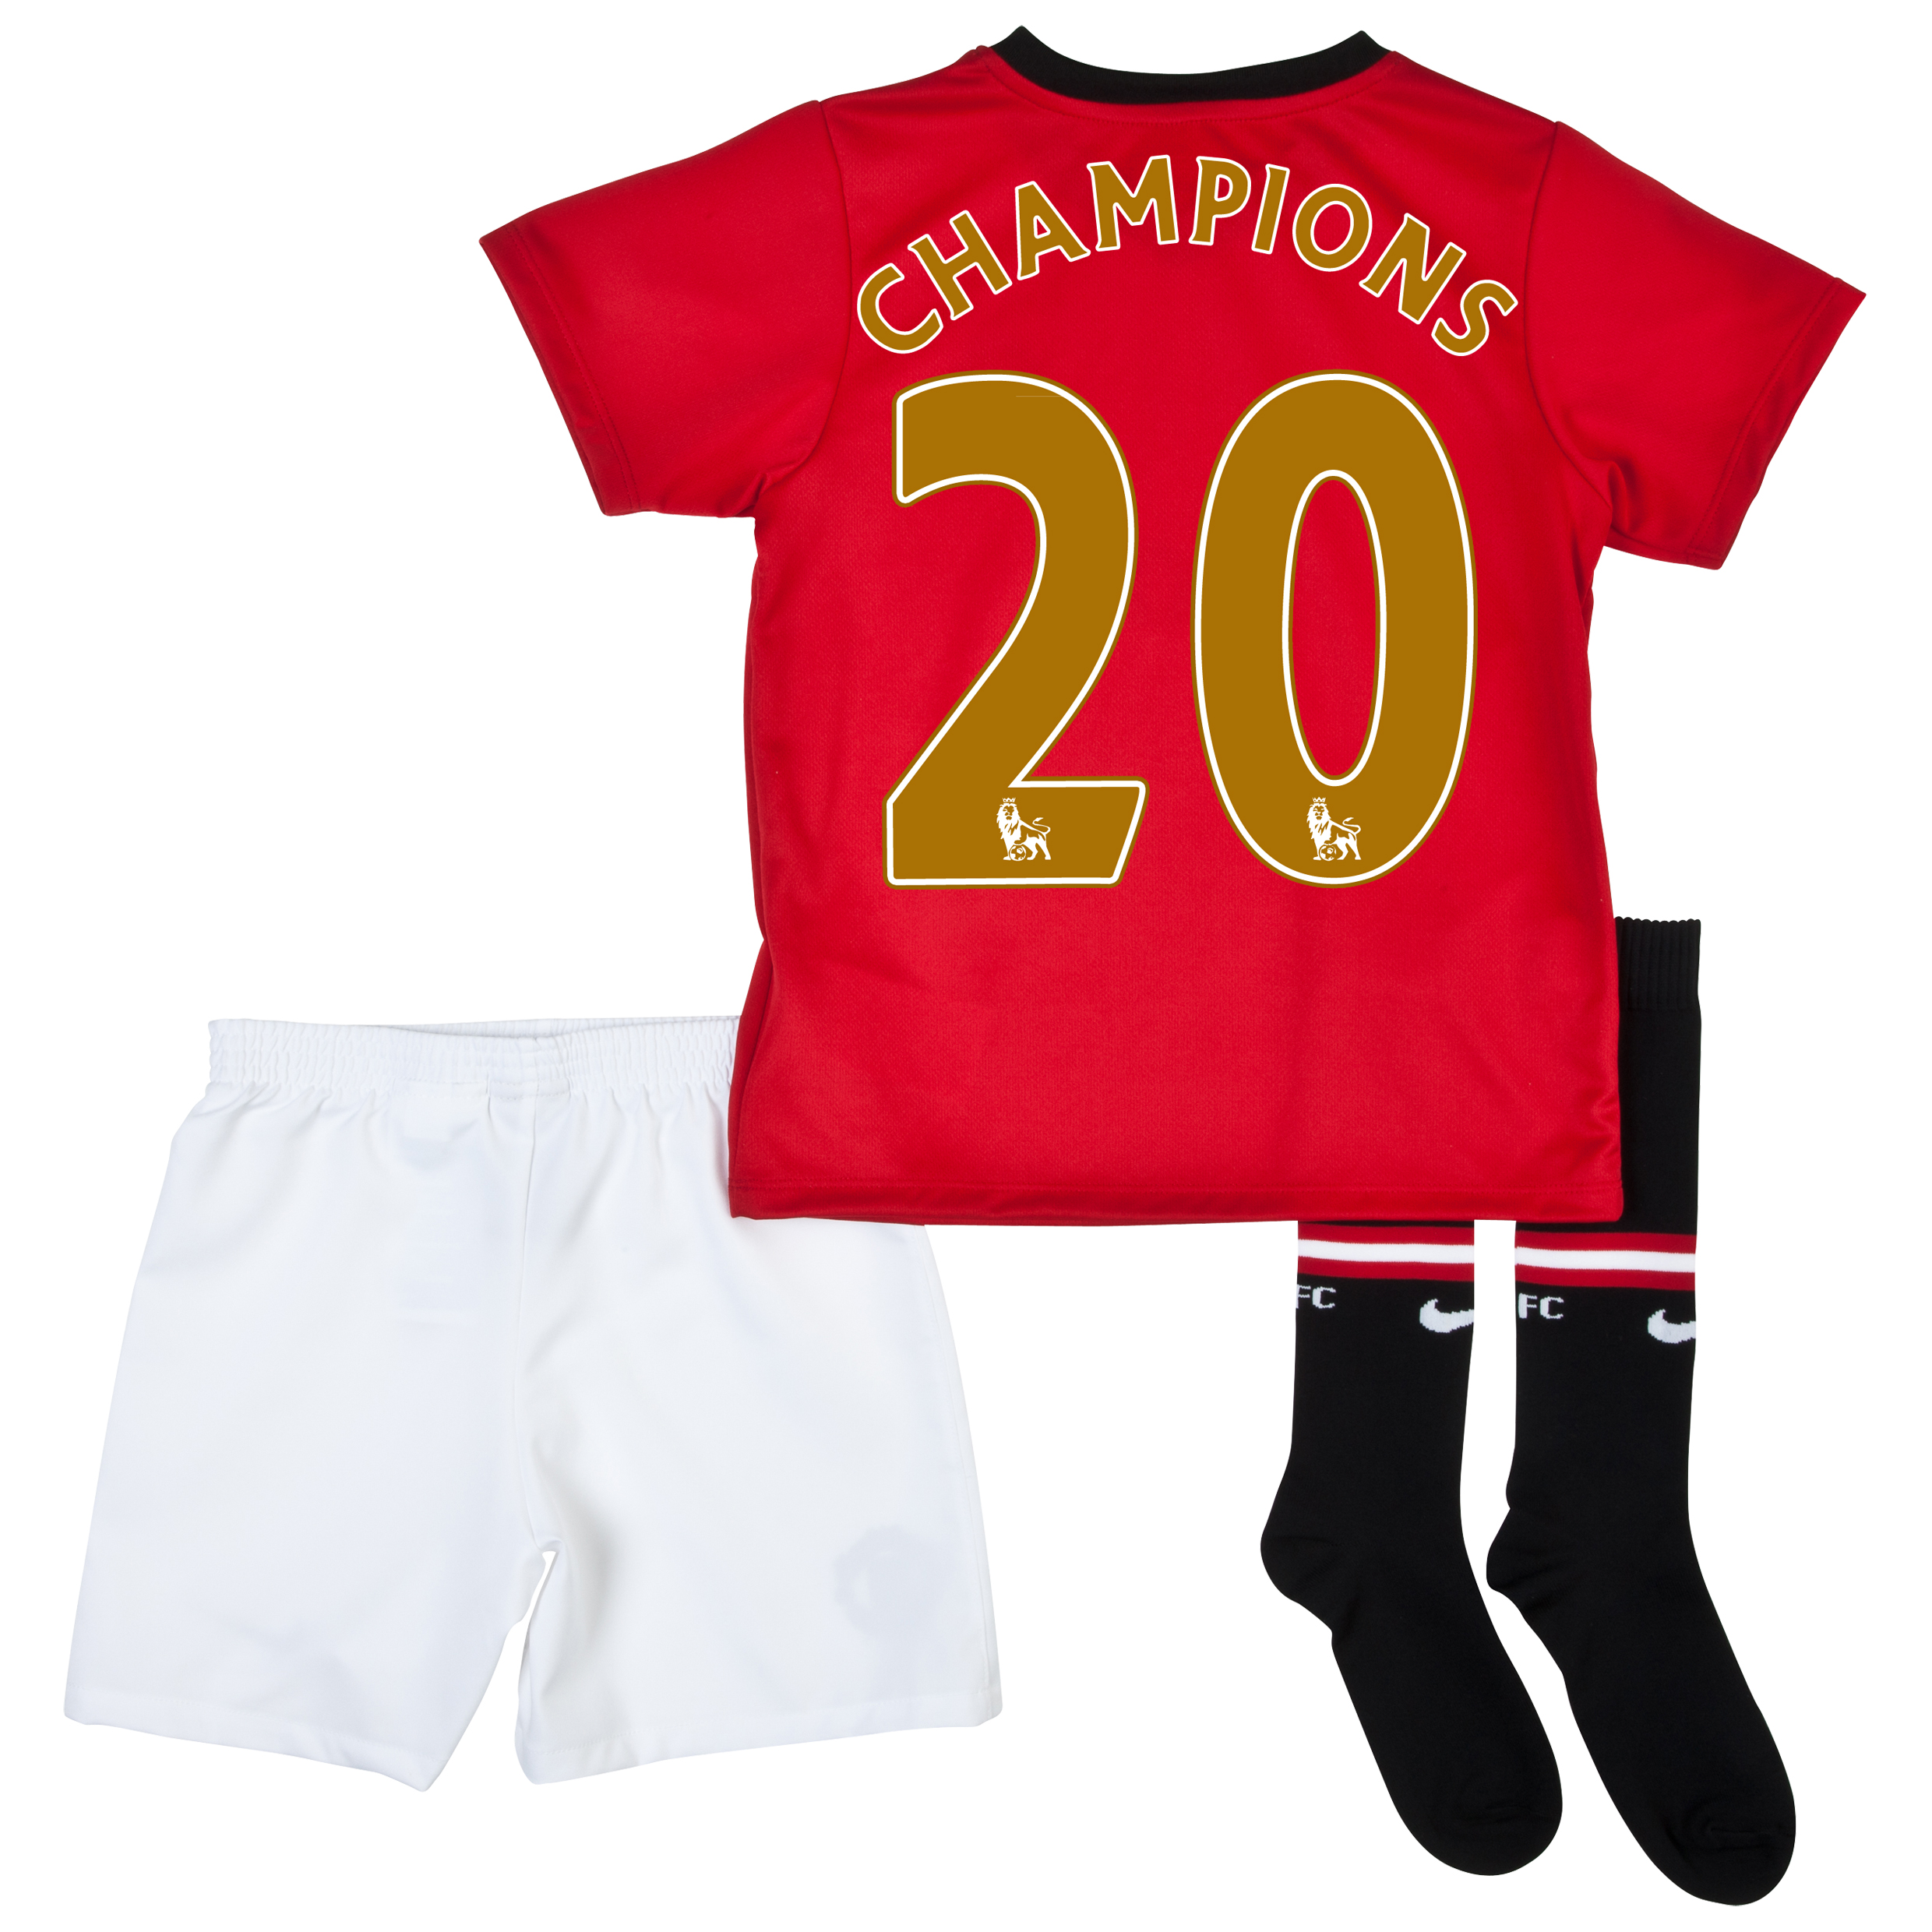 Manchester United Home Kit 2013/14 - Little Boys with Champions 20 printing